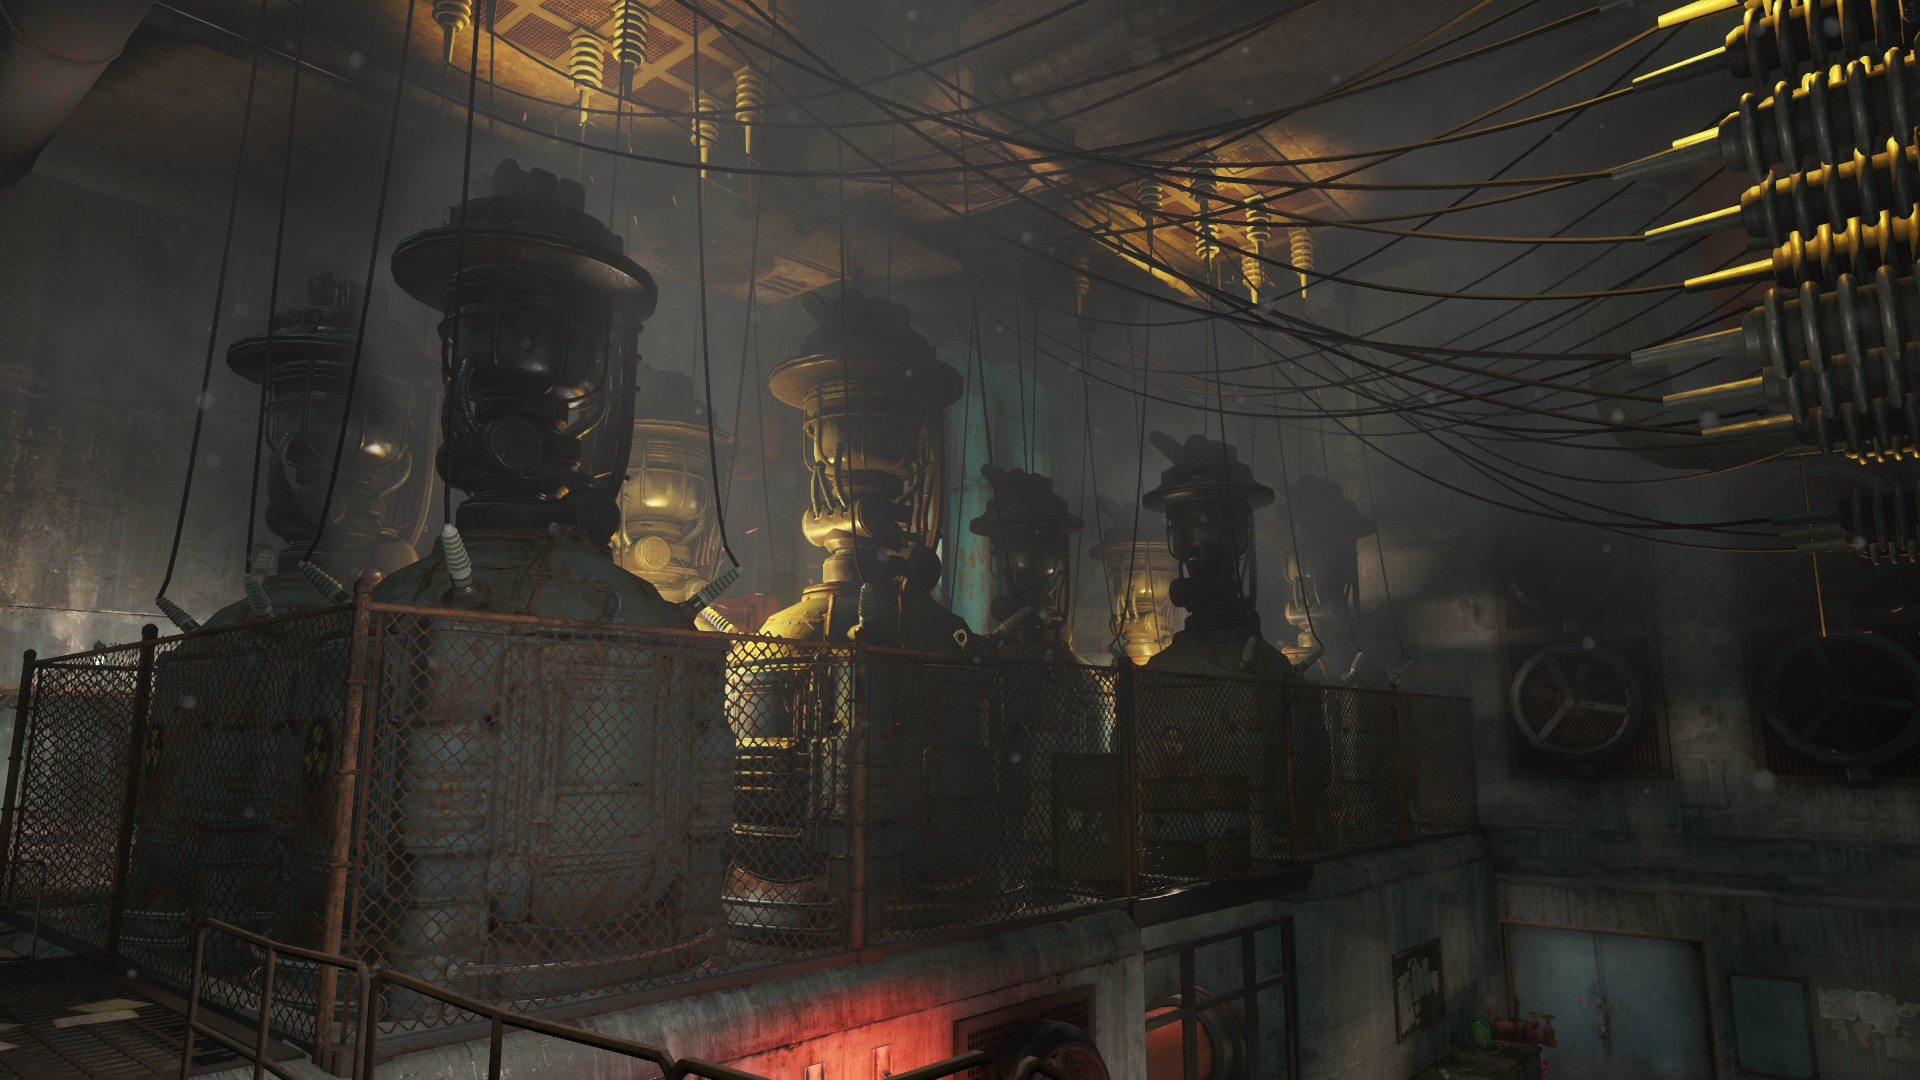 Power Plant Interior image - Hell mod Fallout 4 - Mod